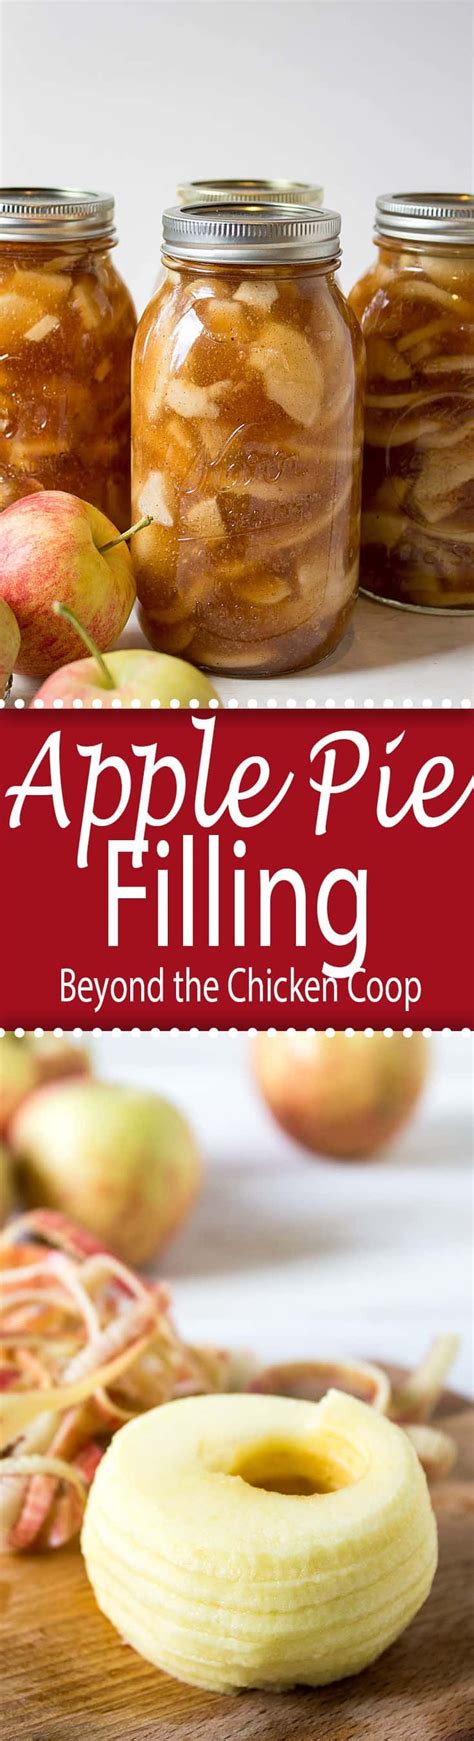 Easy delicious apple pie filling made with tart apples, cinnamon, and nutmeg, that works great canned or frozen. Apple Pie Filling | Recipe | Canning recipes, Food recipes, Apple recipes